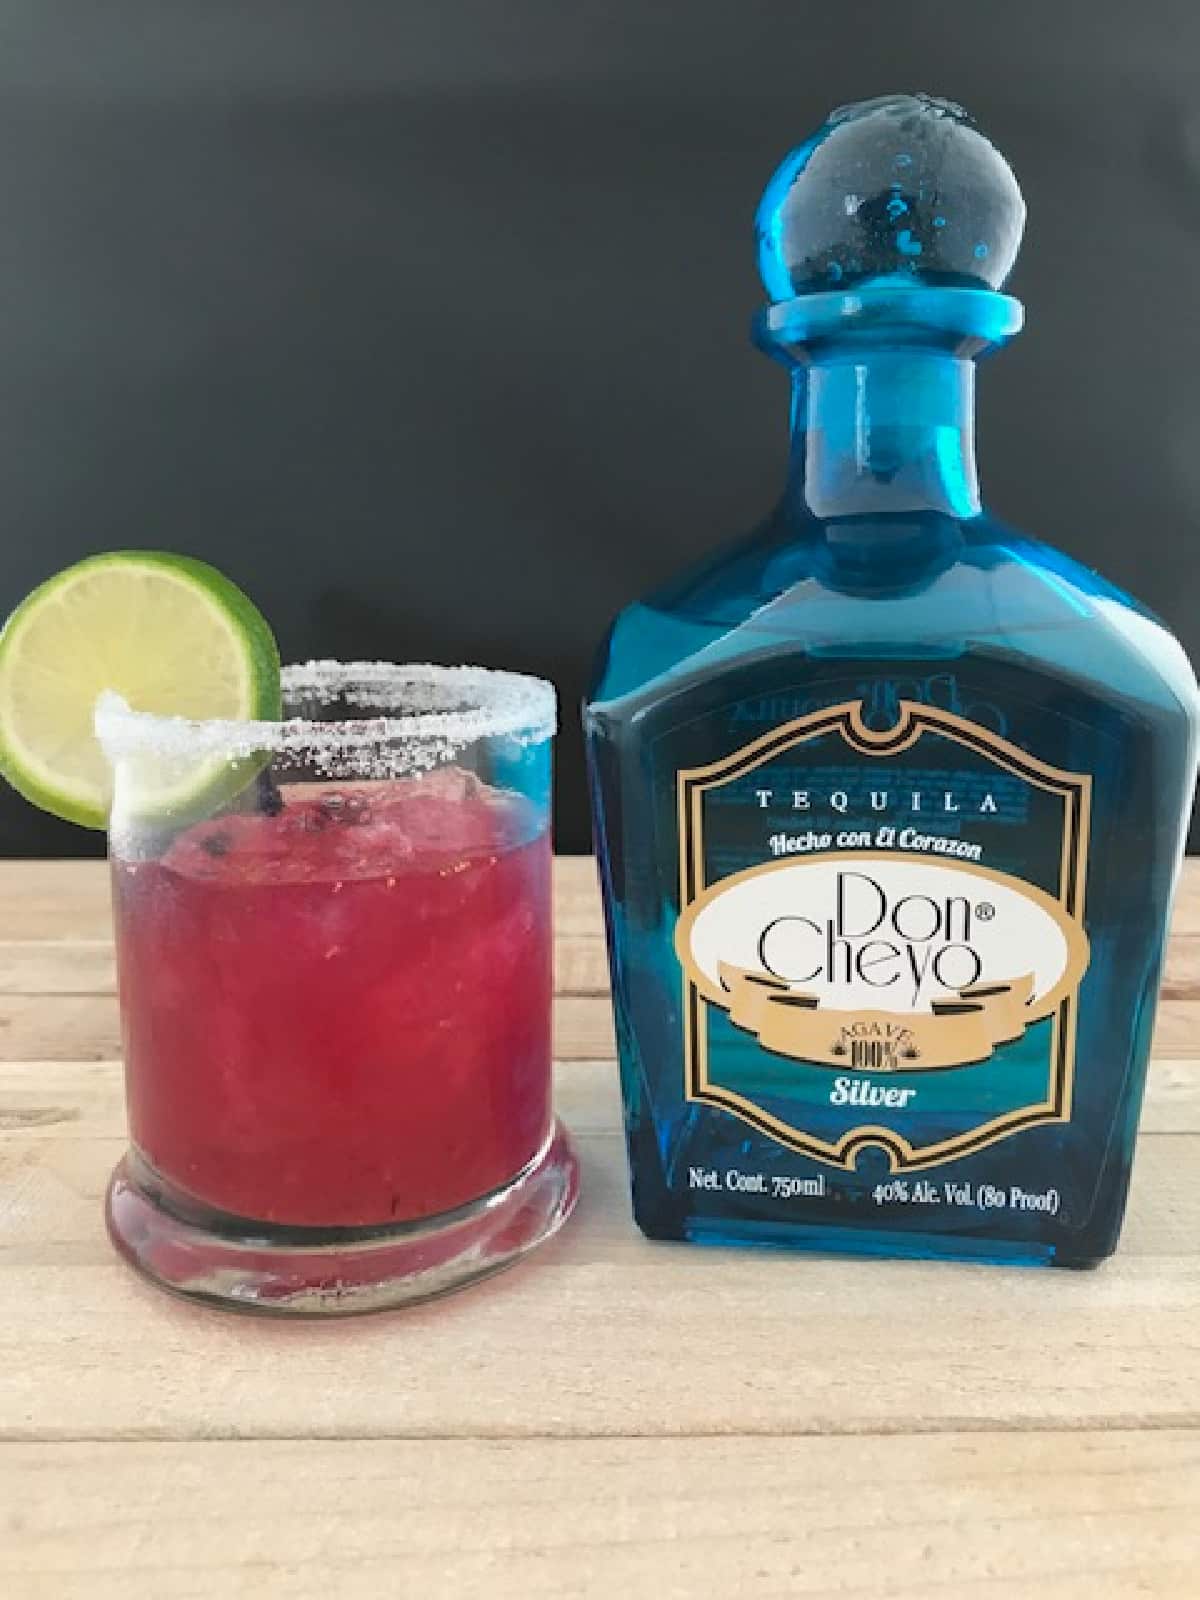 A blueberry margarita garnished with a lime wheel next to a blue bottle of tequila.